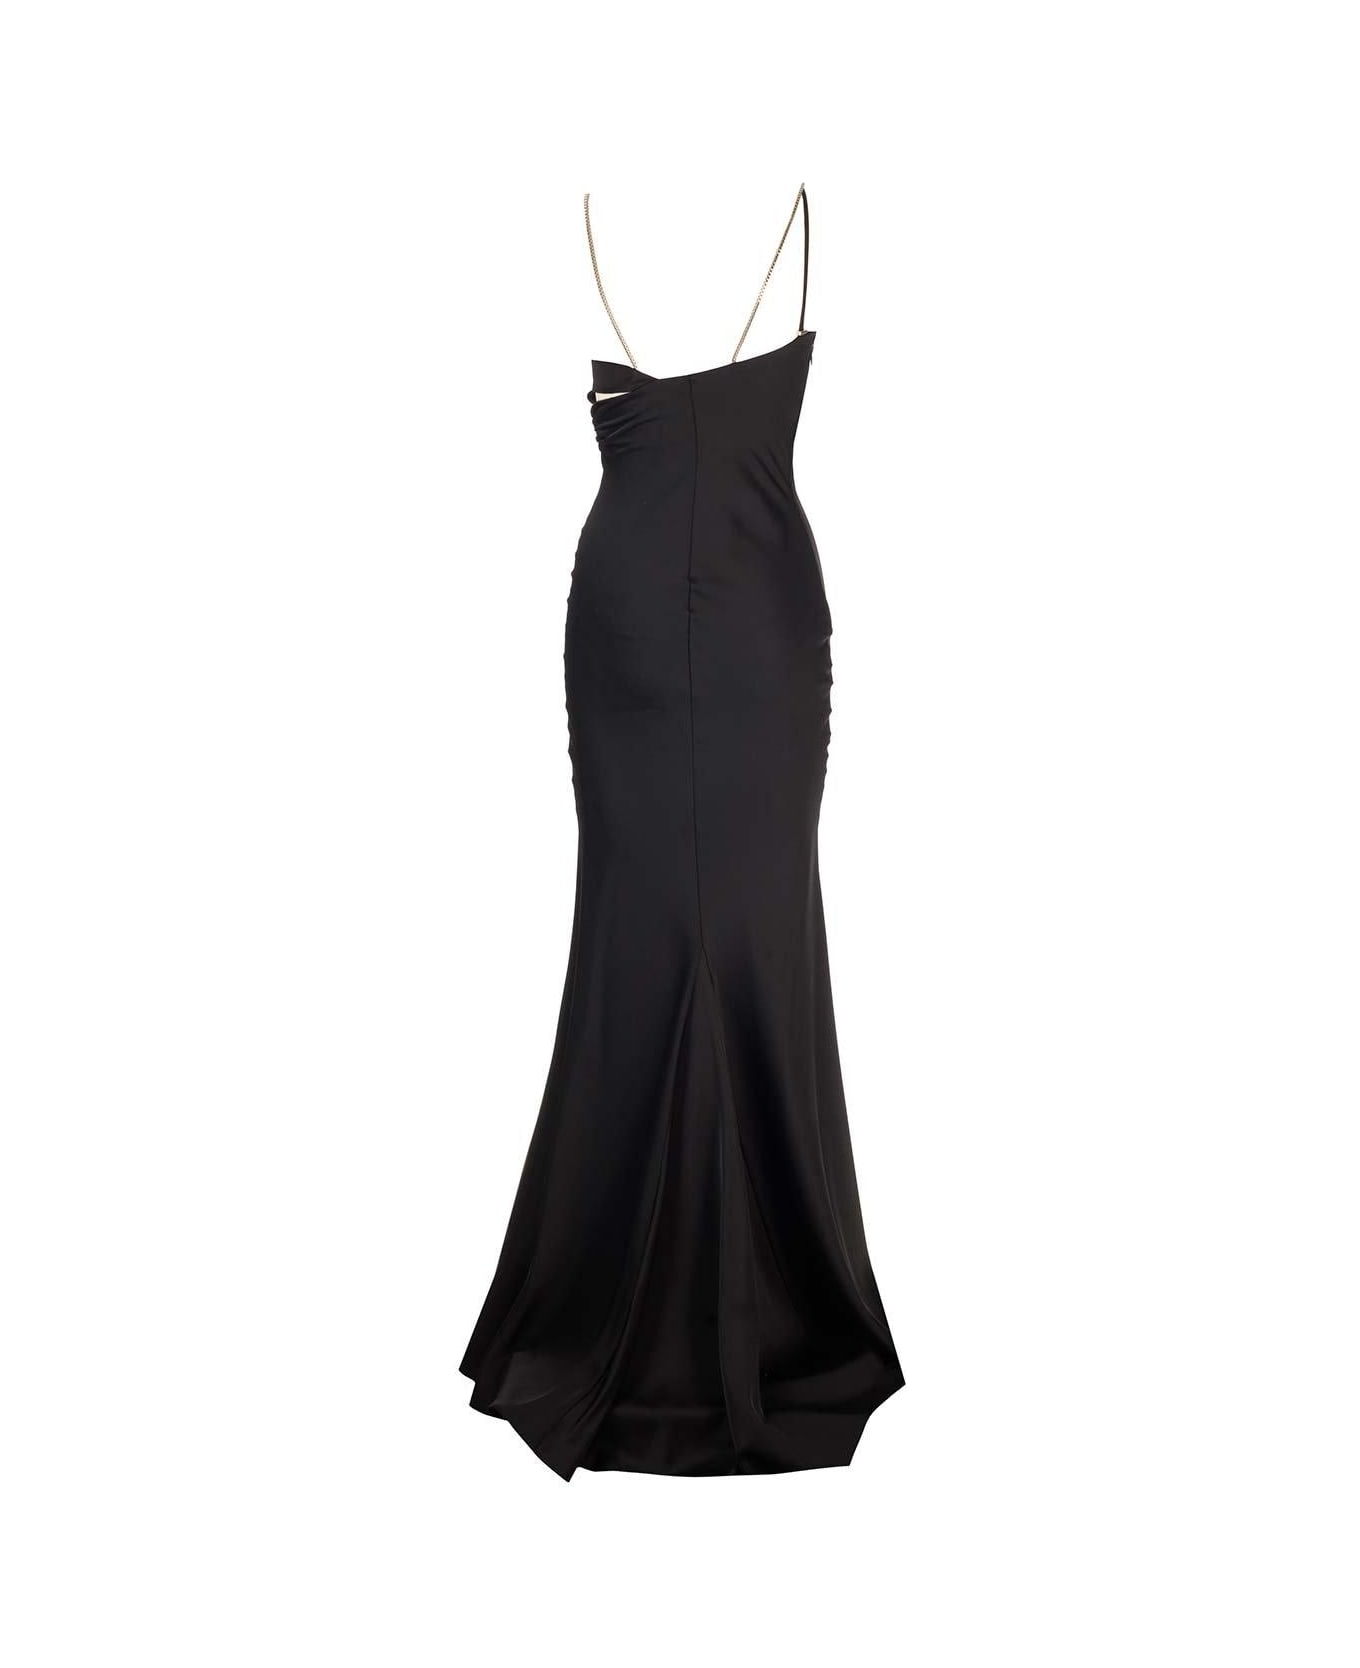 The Attico Cut-out Detailed Flared Sleeveless Dress